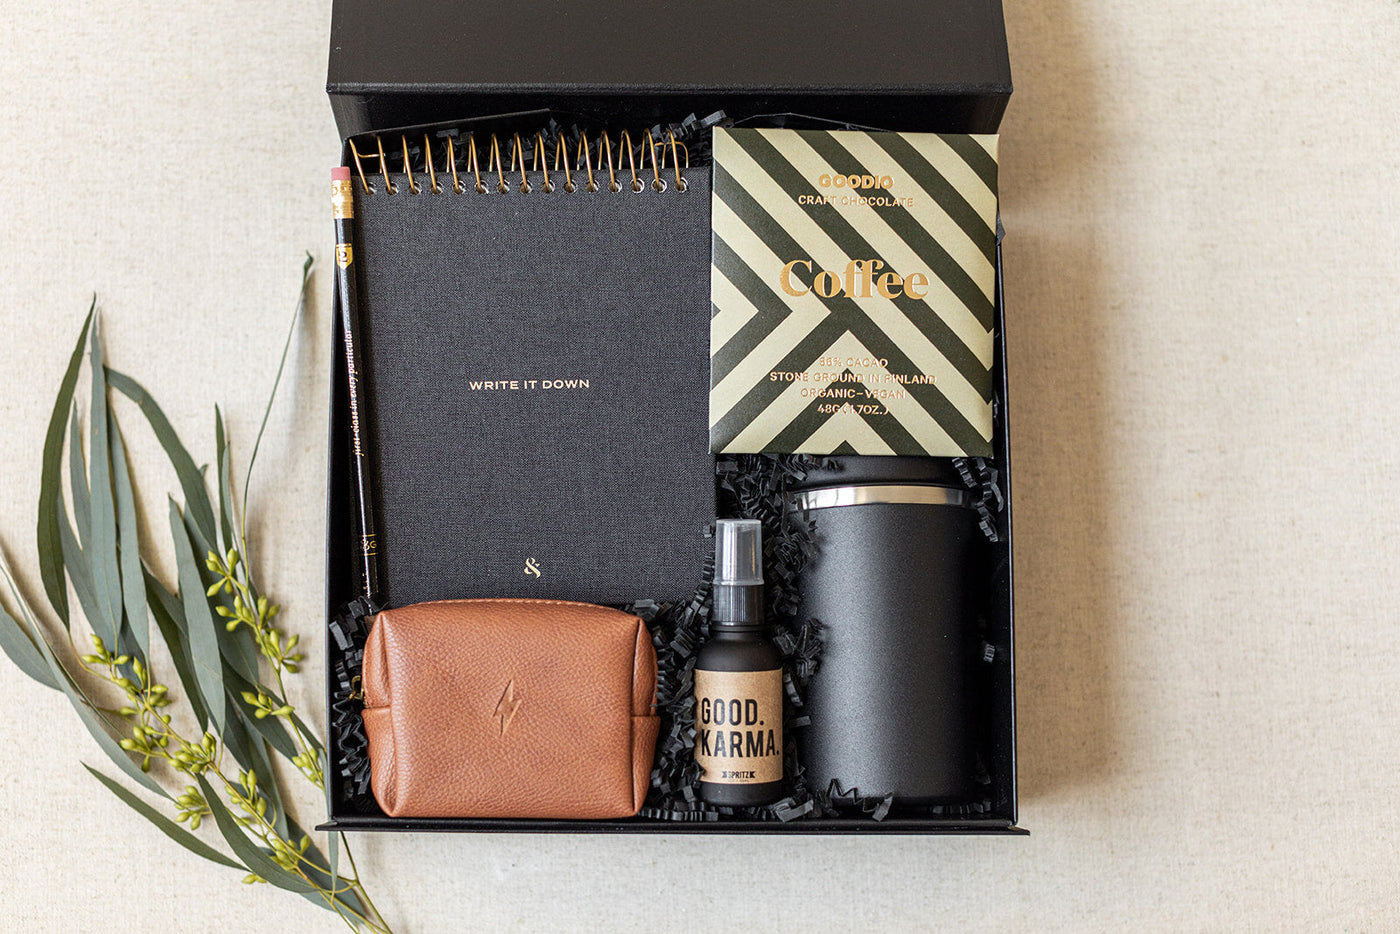 The Corporate Suite Gift Box